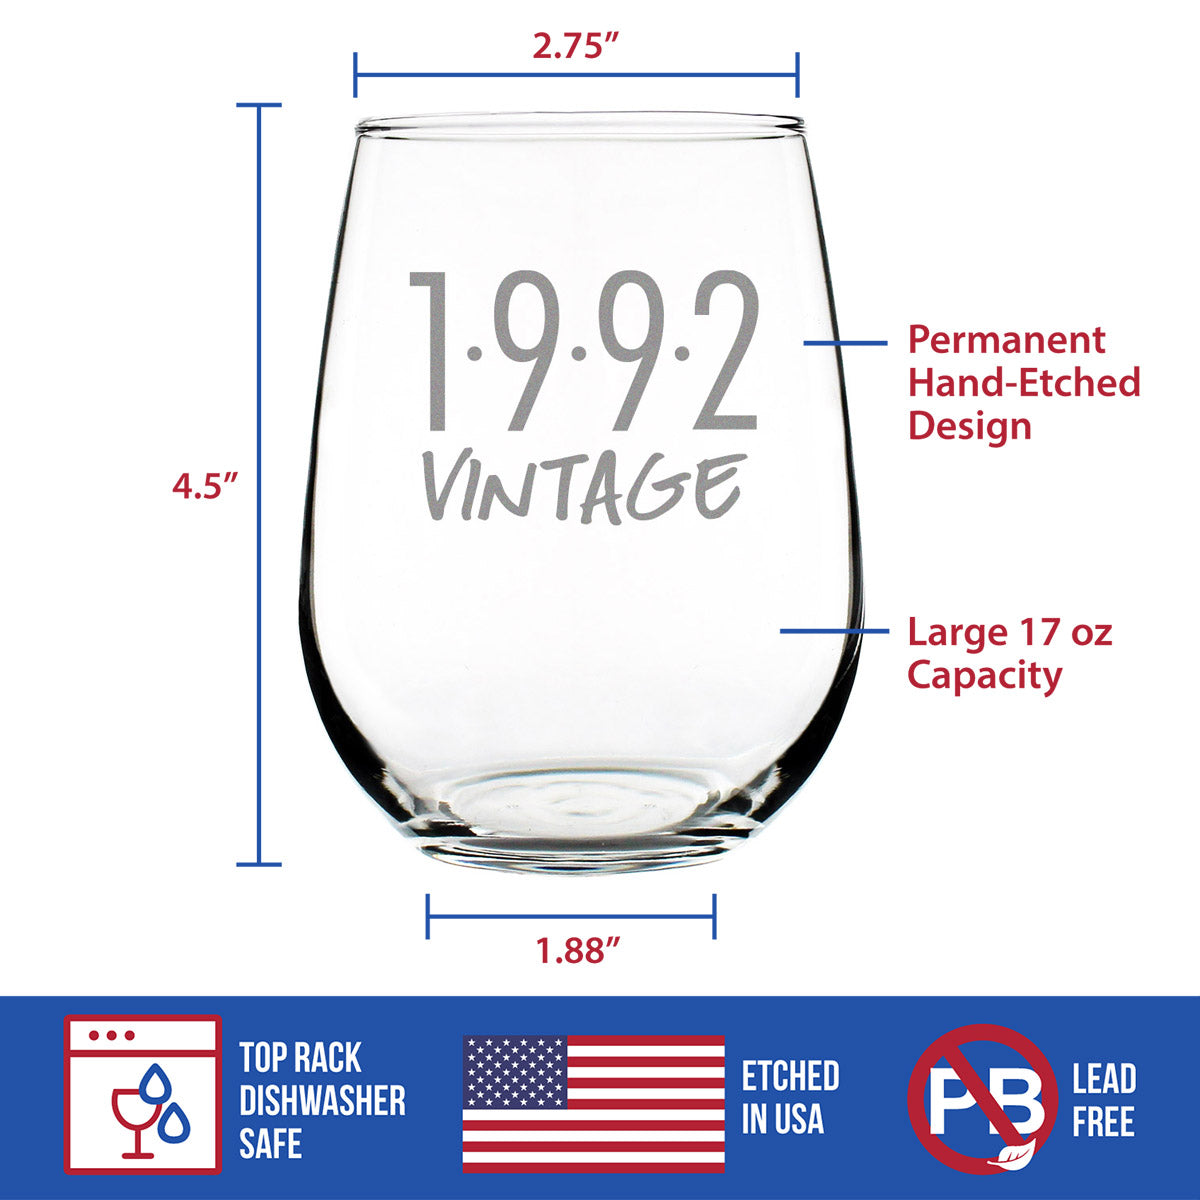 Vintage 1992 - 32nd Birthday Stemless Wine Glass Gifts for Women &amp; Men Turning 32 - Bday Party Decor - Large Glasses